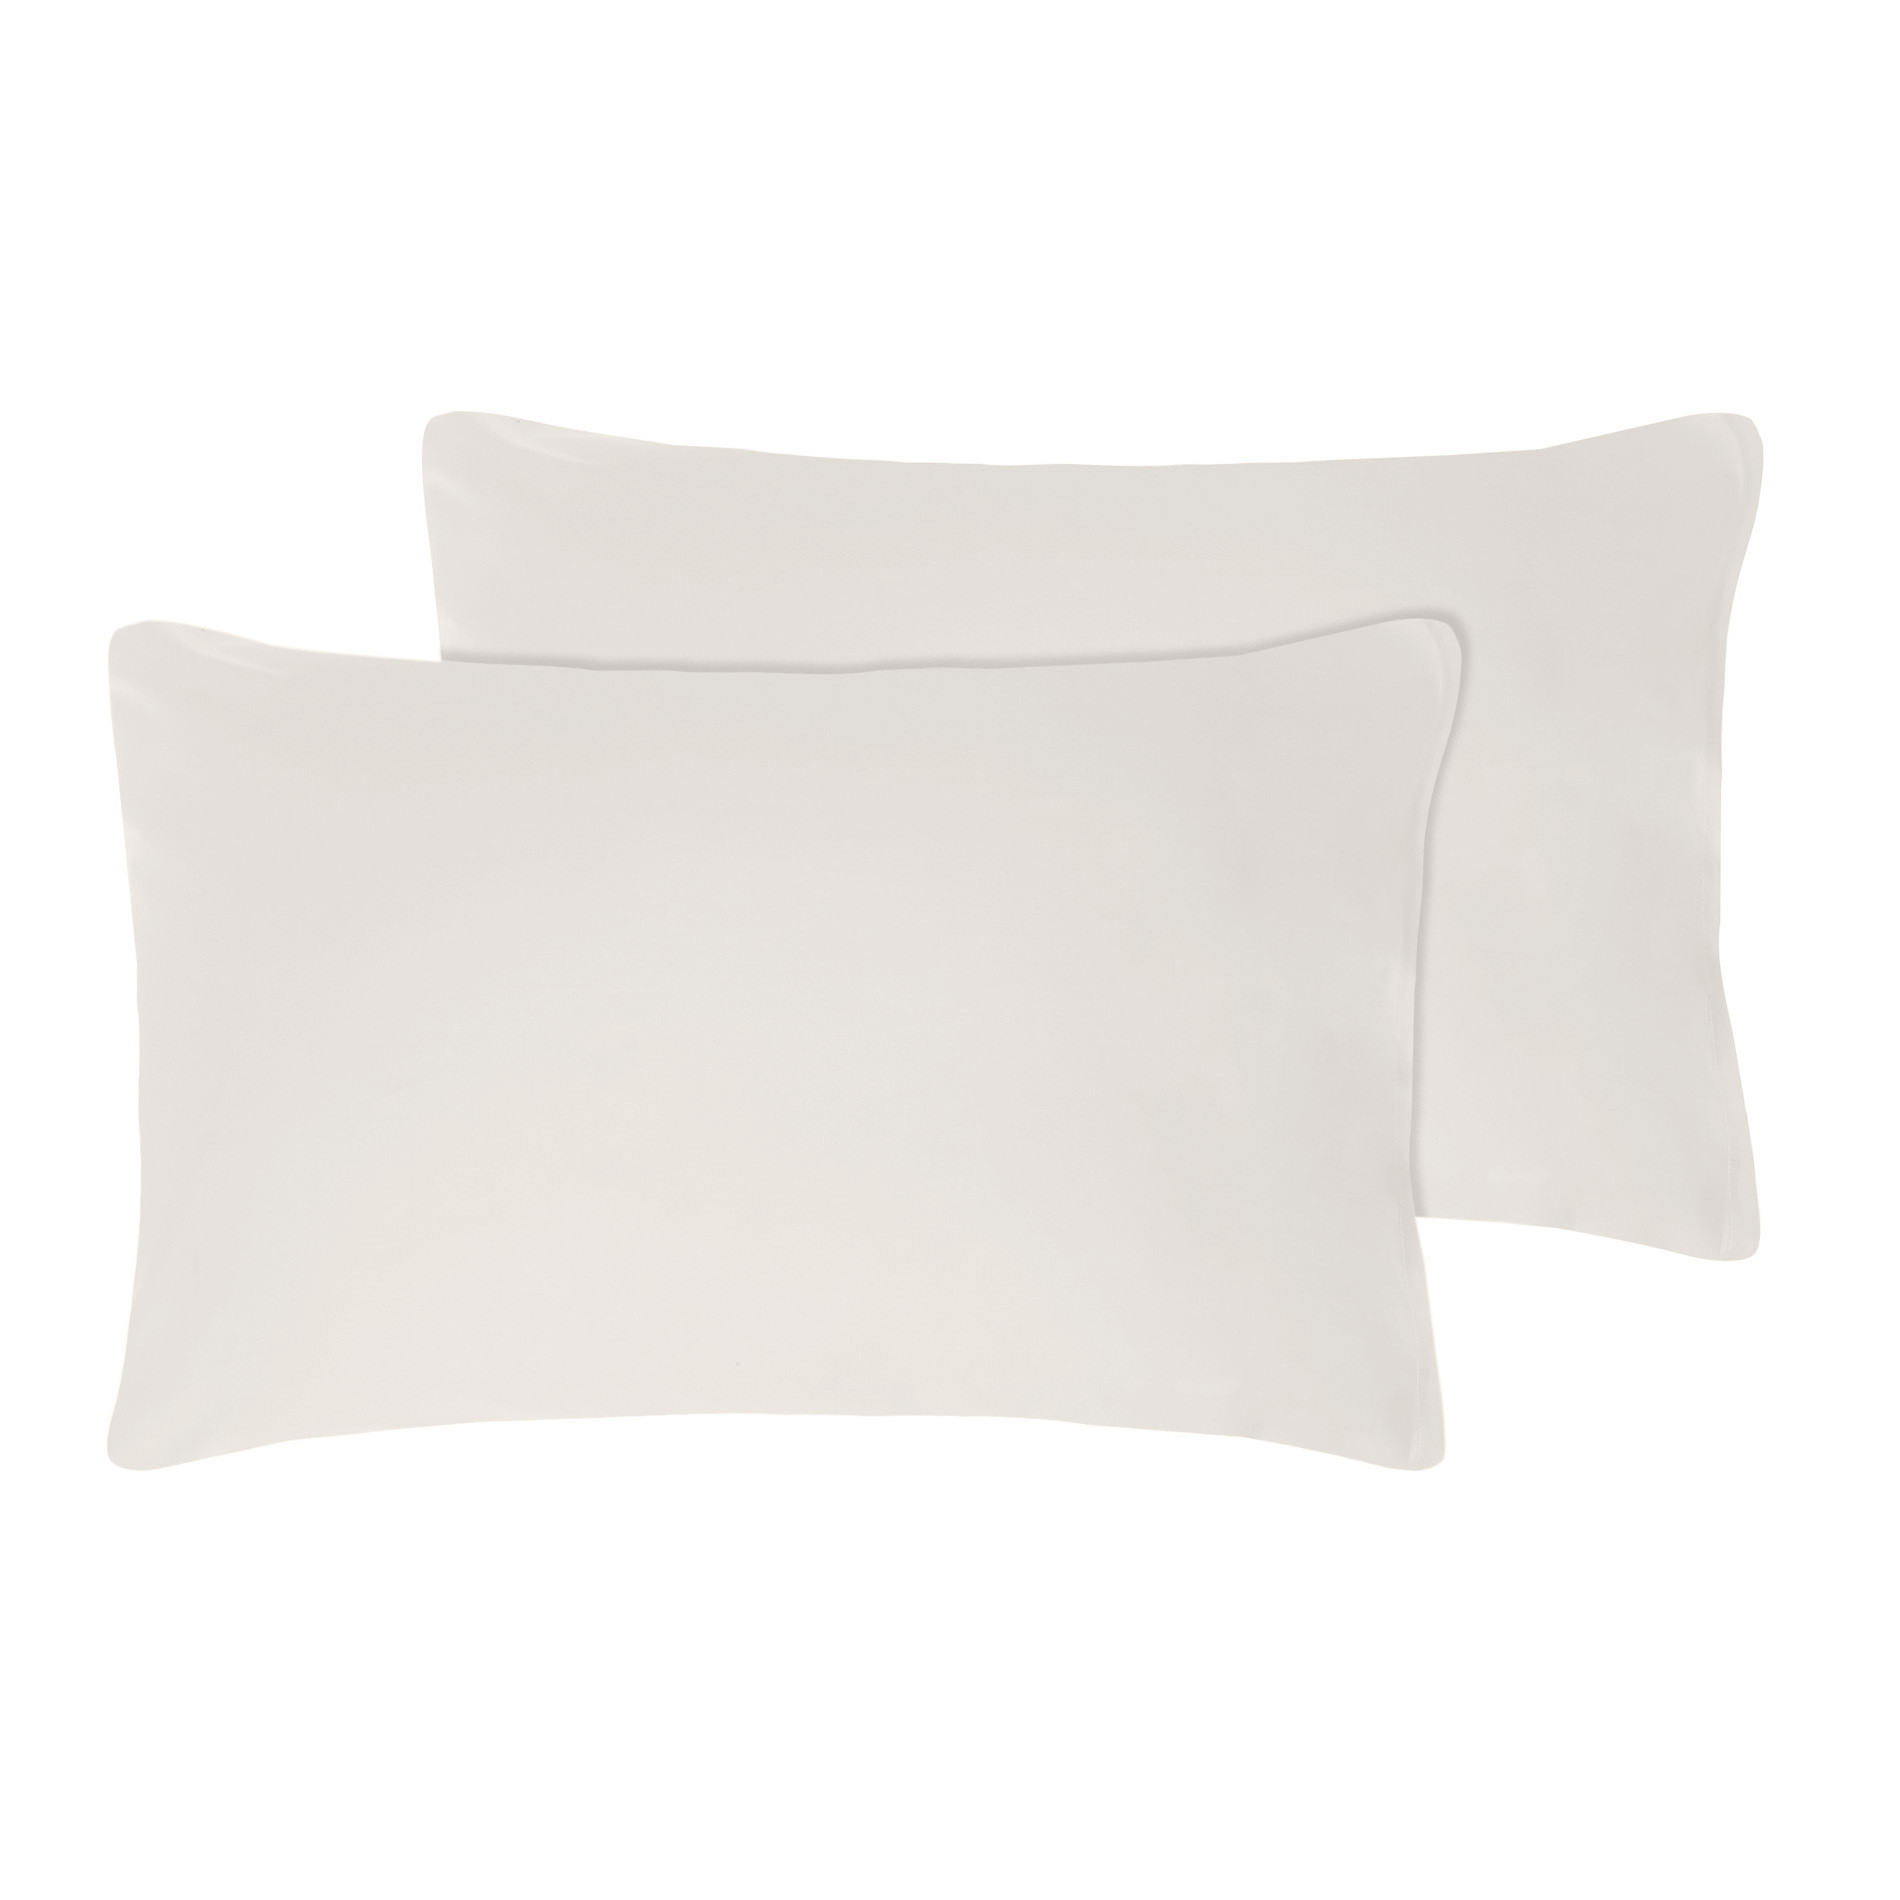 Zefiro 2-pack pillowcases in 100% cotton satin, Greige, large image number 0